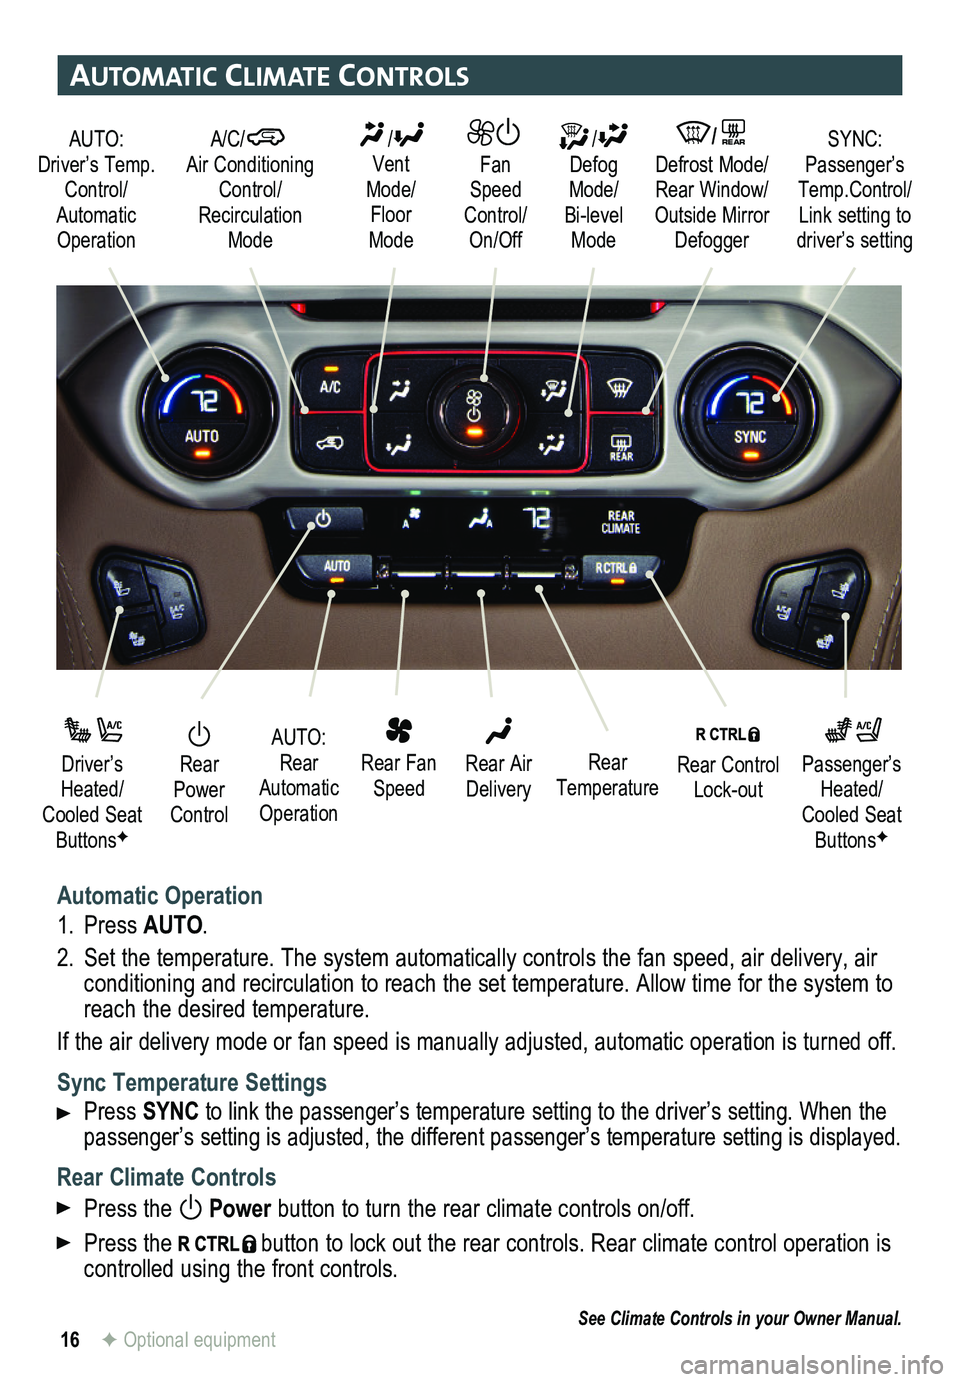 GMC YUKON 2015  Get To Know Guide 16
automatIc clImate controls
Automatic Operation
1. Press AUTO.
2. Set the temperature. The system automatically   
controls the fan speed, air delivery, air conditioning and recirculation to reach t